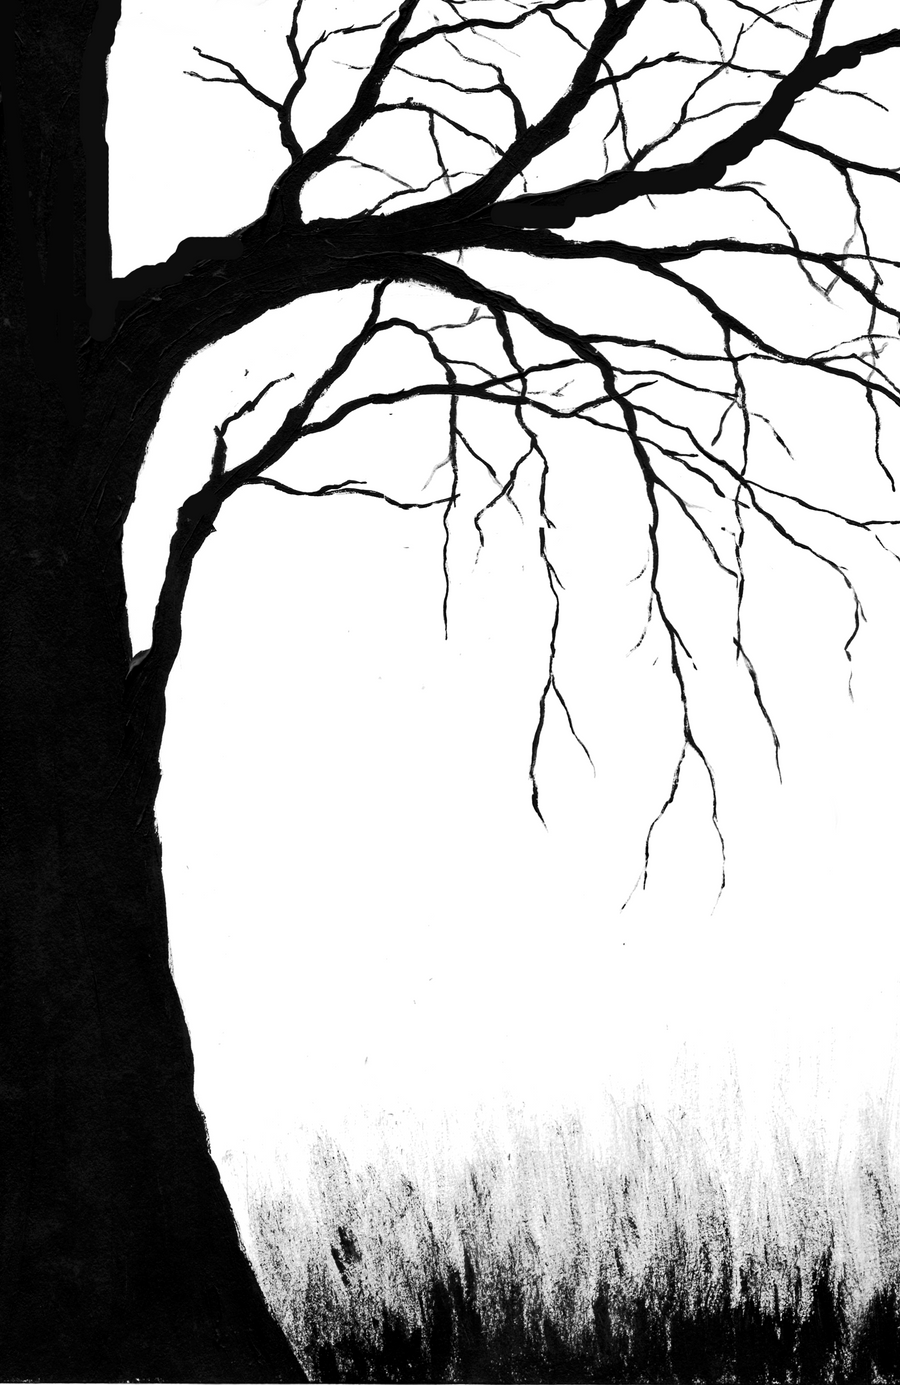 Spooky Tree Cover by blablover5 on DeviantArt